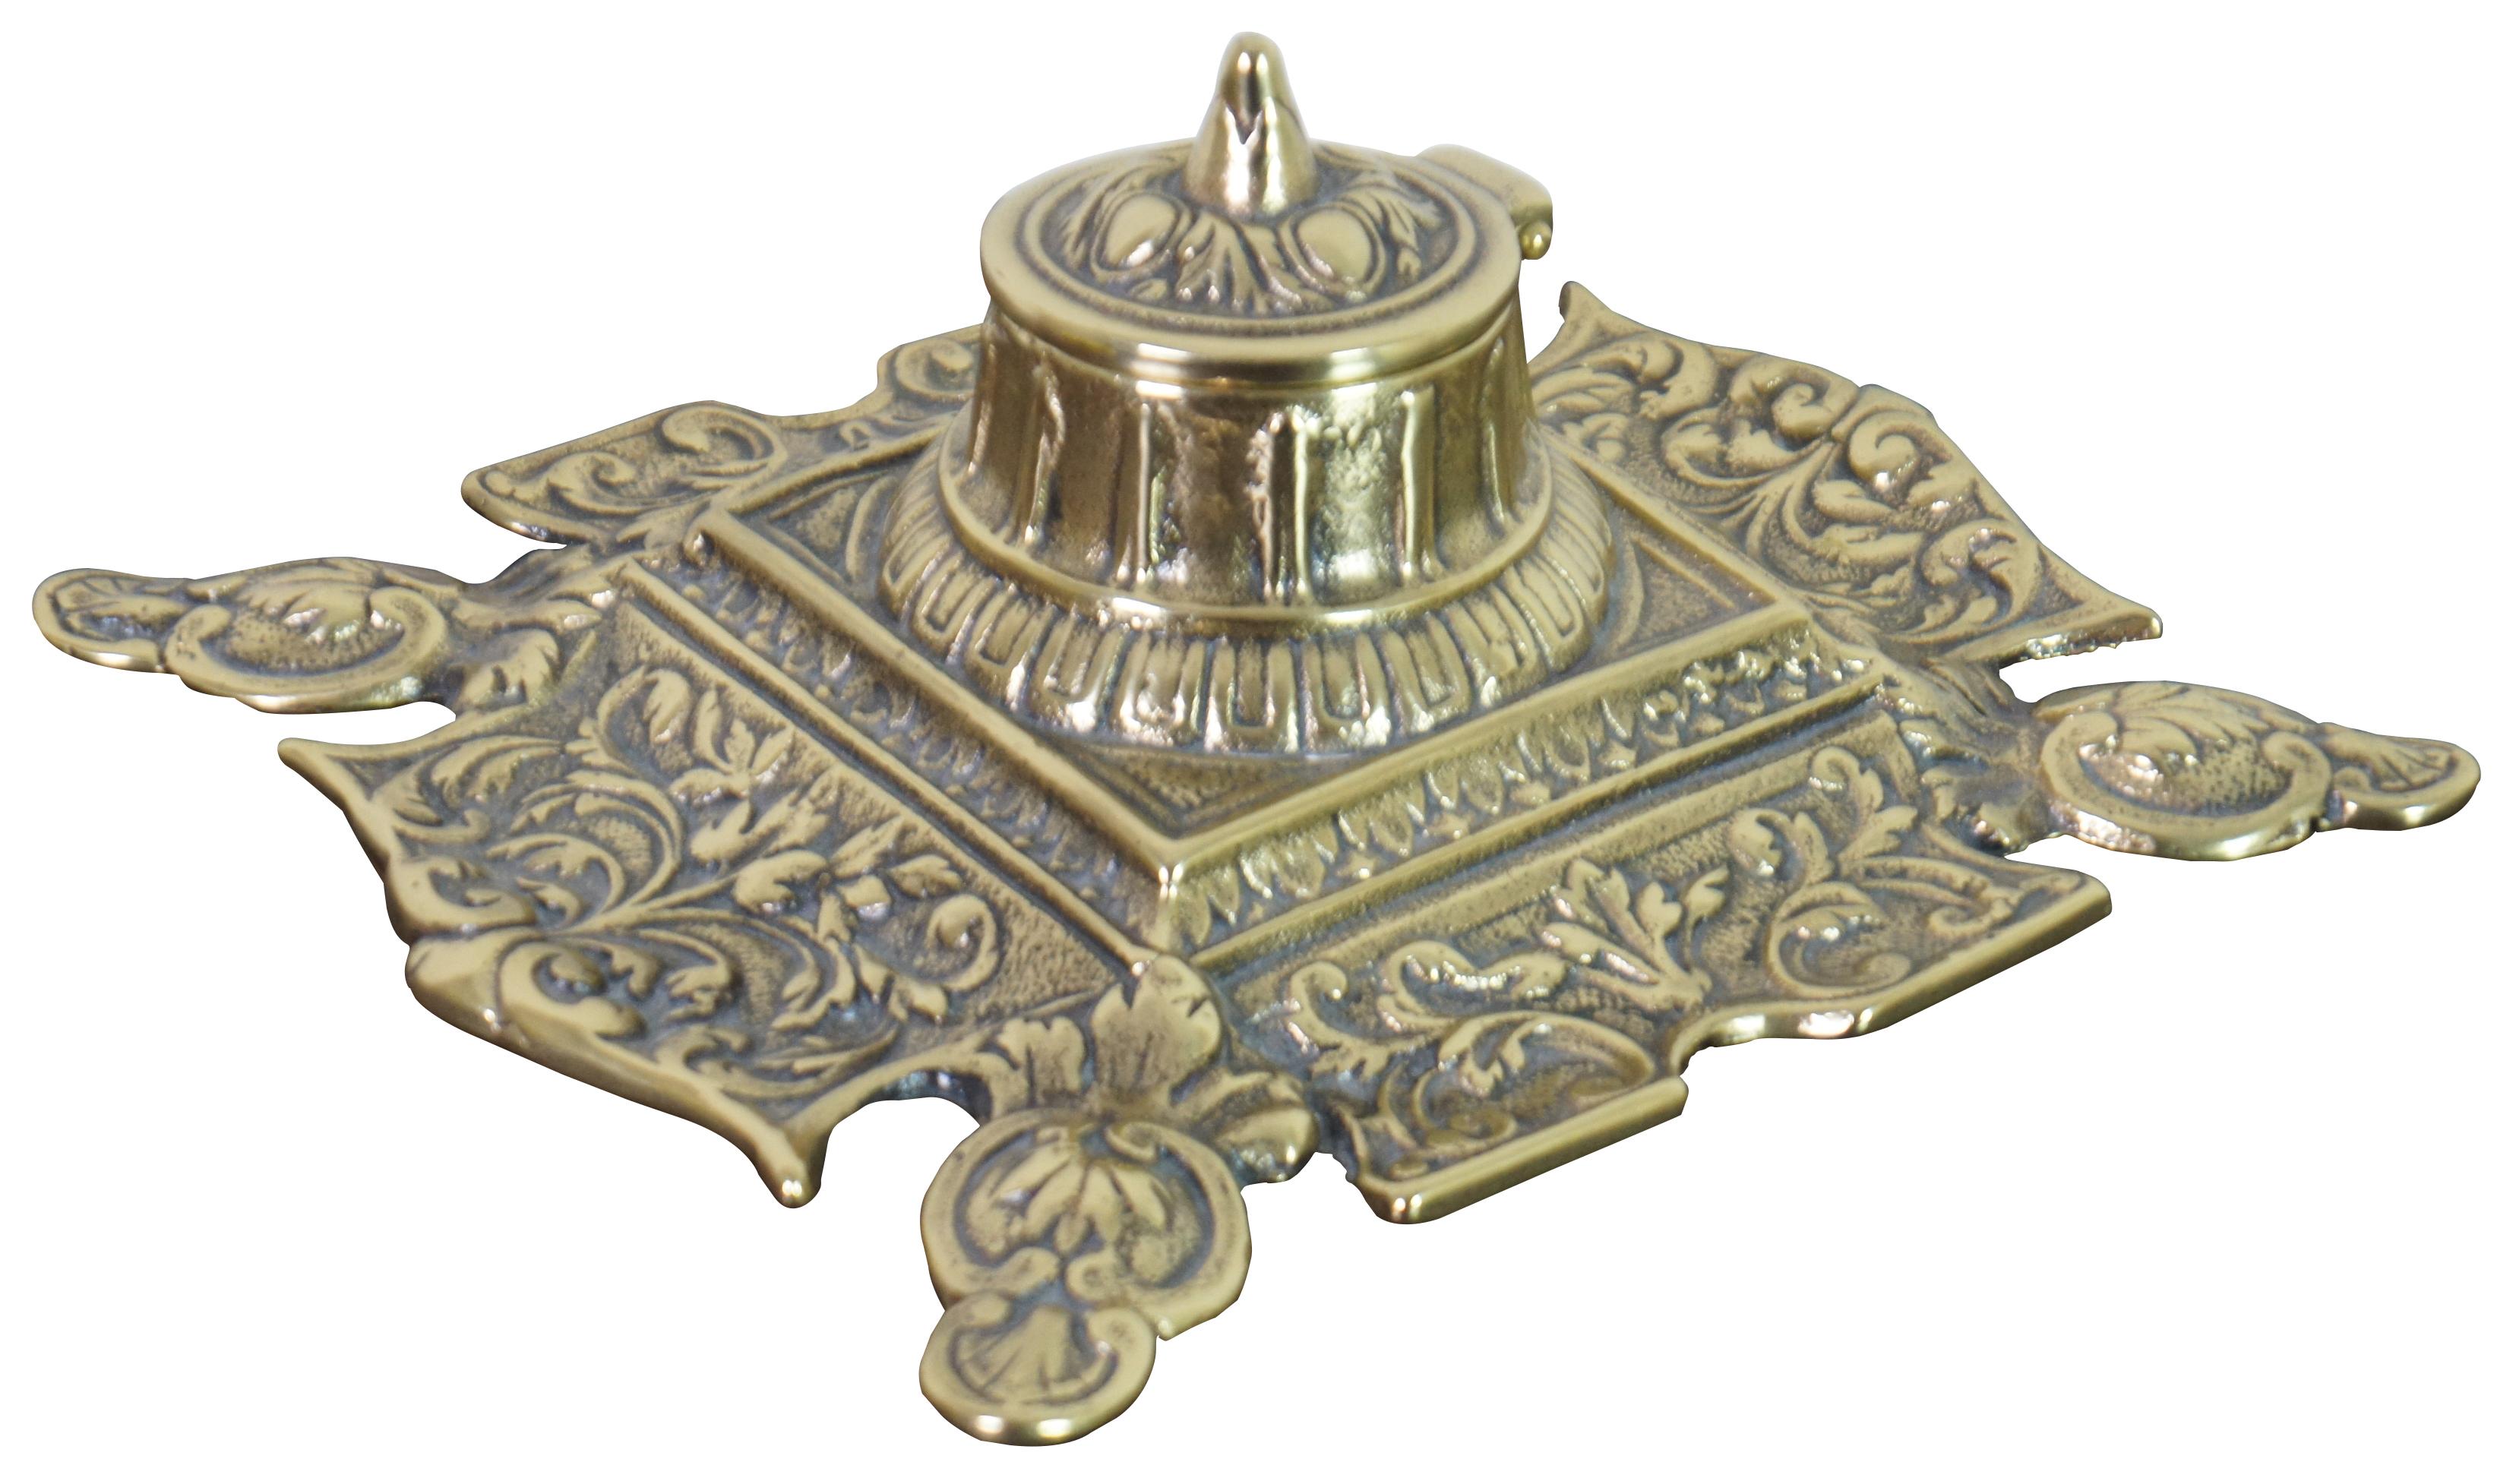 Antique ornate art nouveau style embossed scalloped floral / acanthus brass inkwell with insert.

Provenance : Jerome Schottenstein Estate, Columbus Ohio. Jerome was was an American entrepreneur and philanthropist, co-founder of Schottenstein